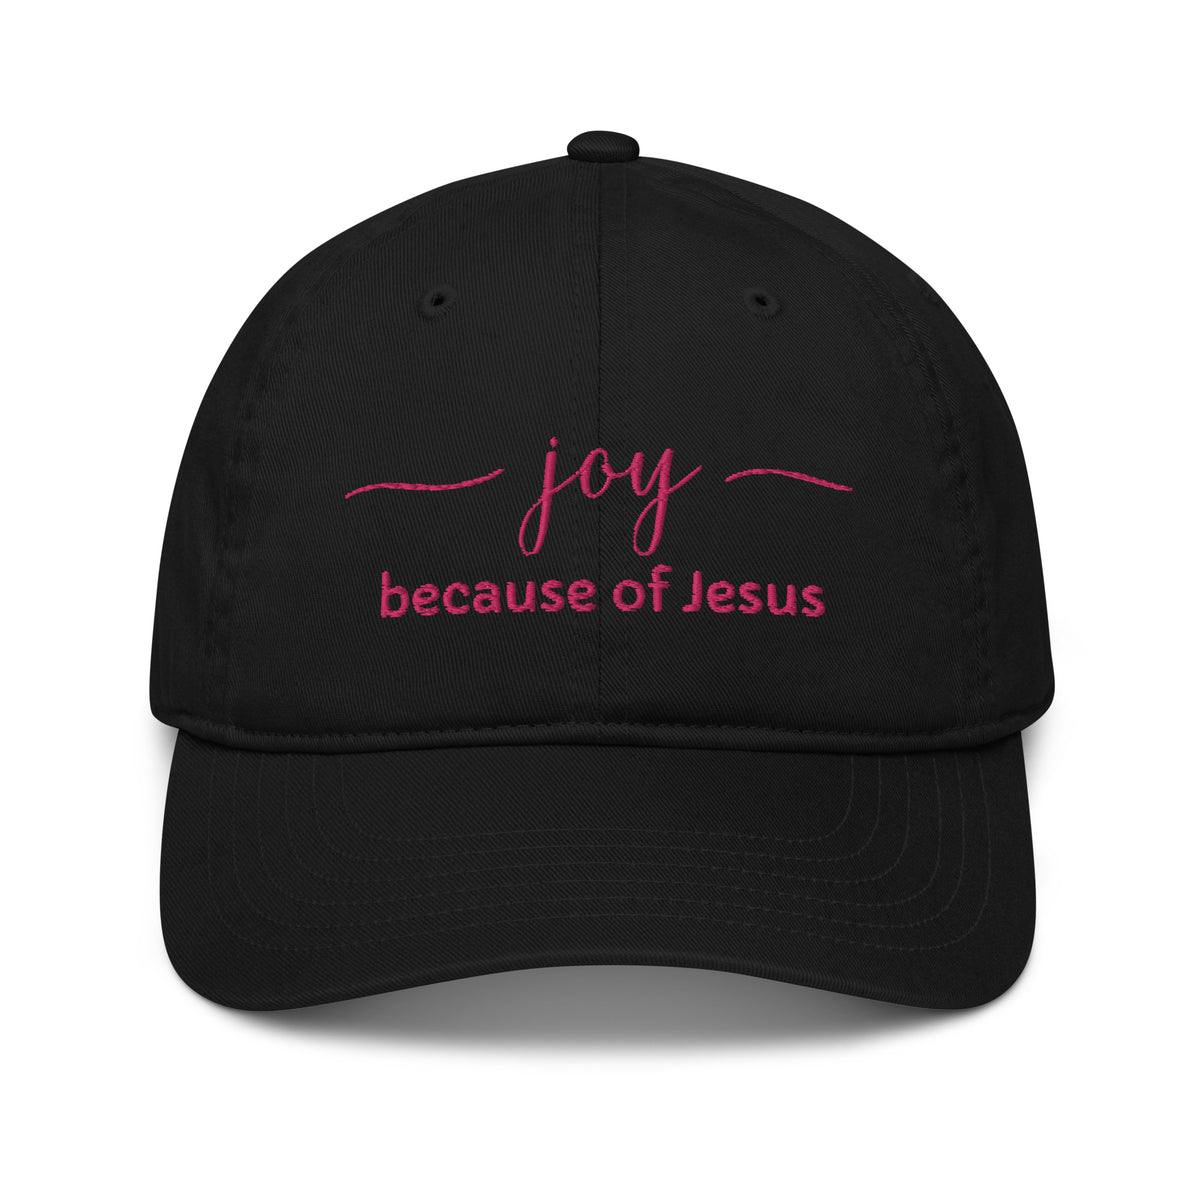 JOY because of Jesus cap - 5 colors available